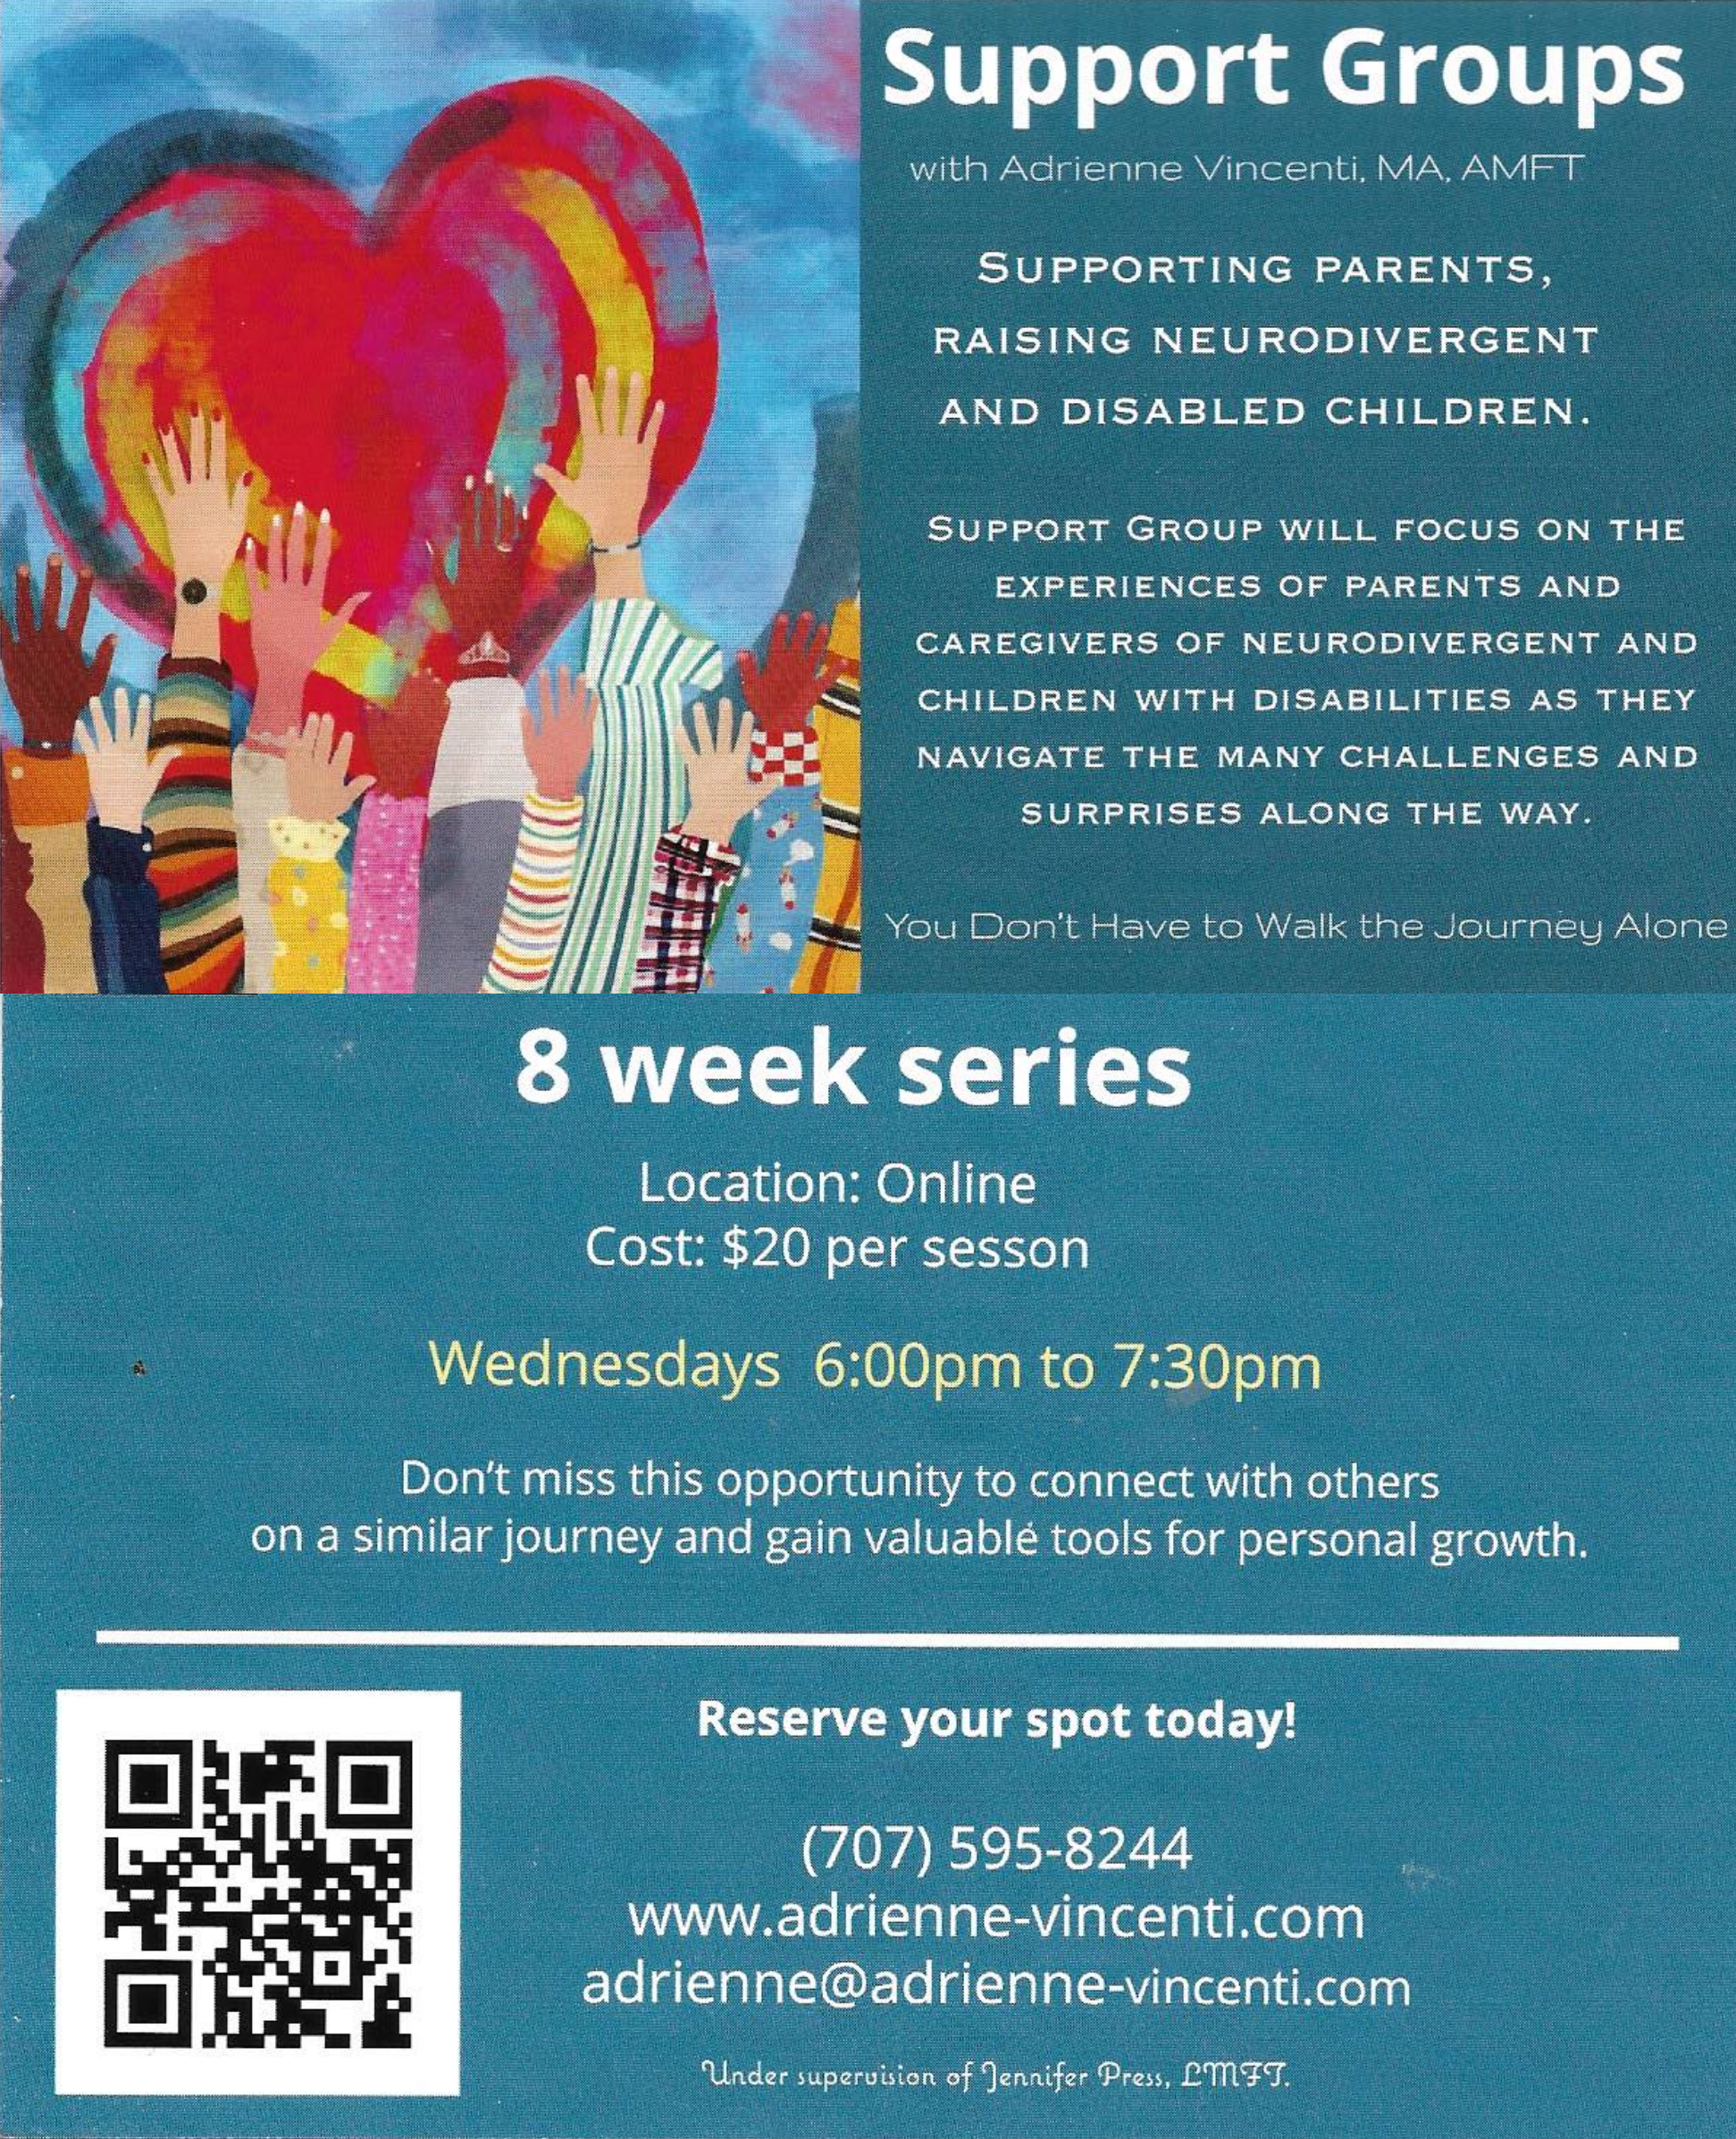 Support groups for parents raising neurodivergent and disabled children www.adrienne-vincenti.com